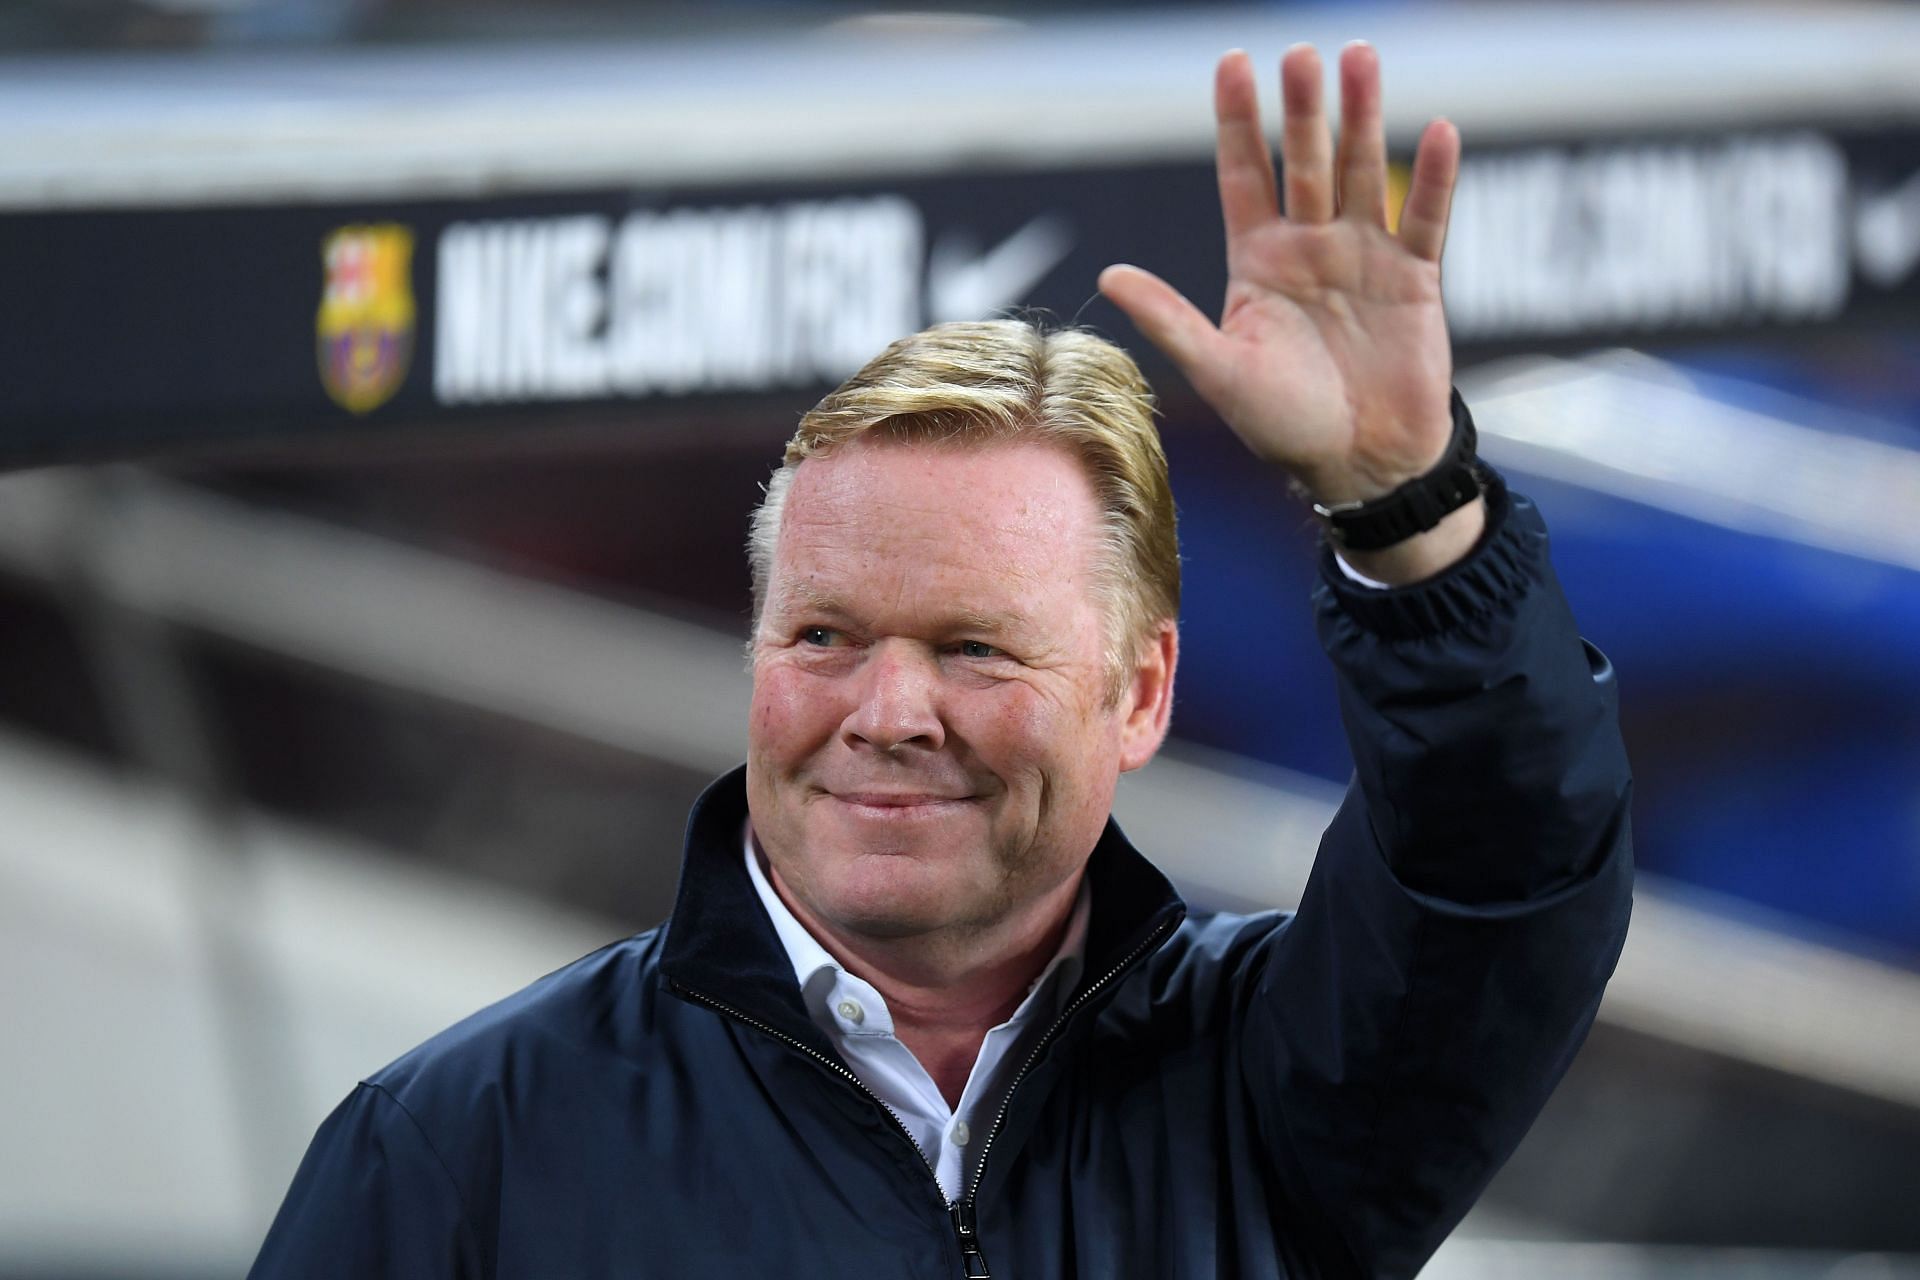 The tactician is on course to replace Louis van Gaal as manager of the Dutch national team